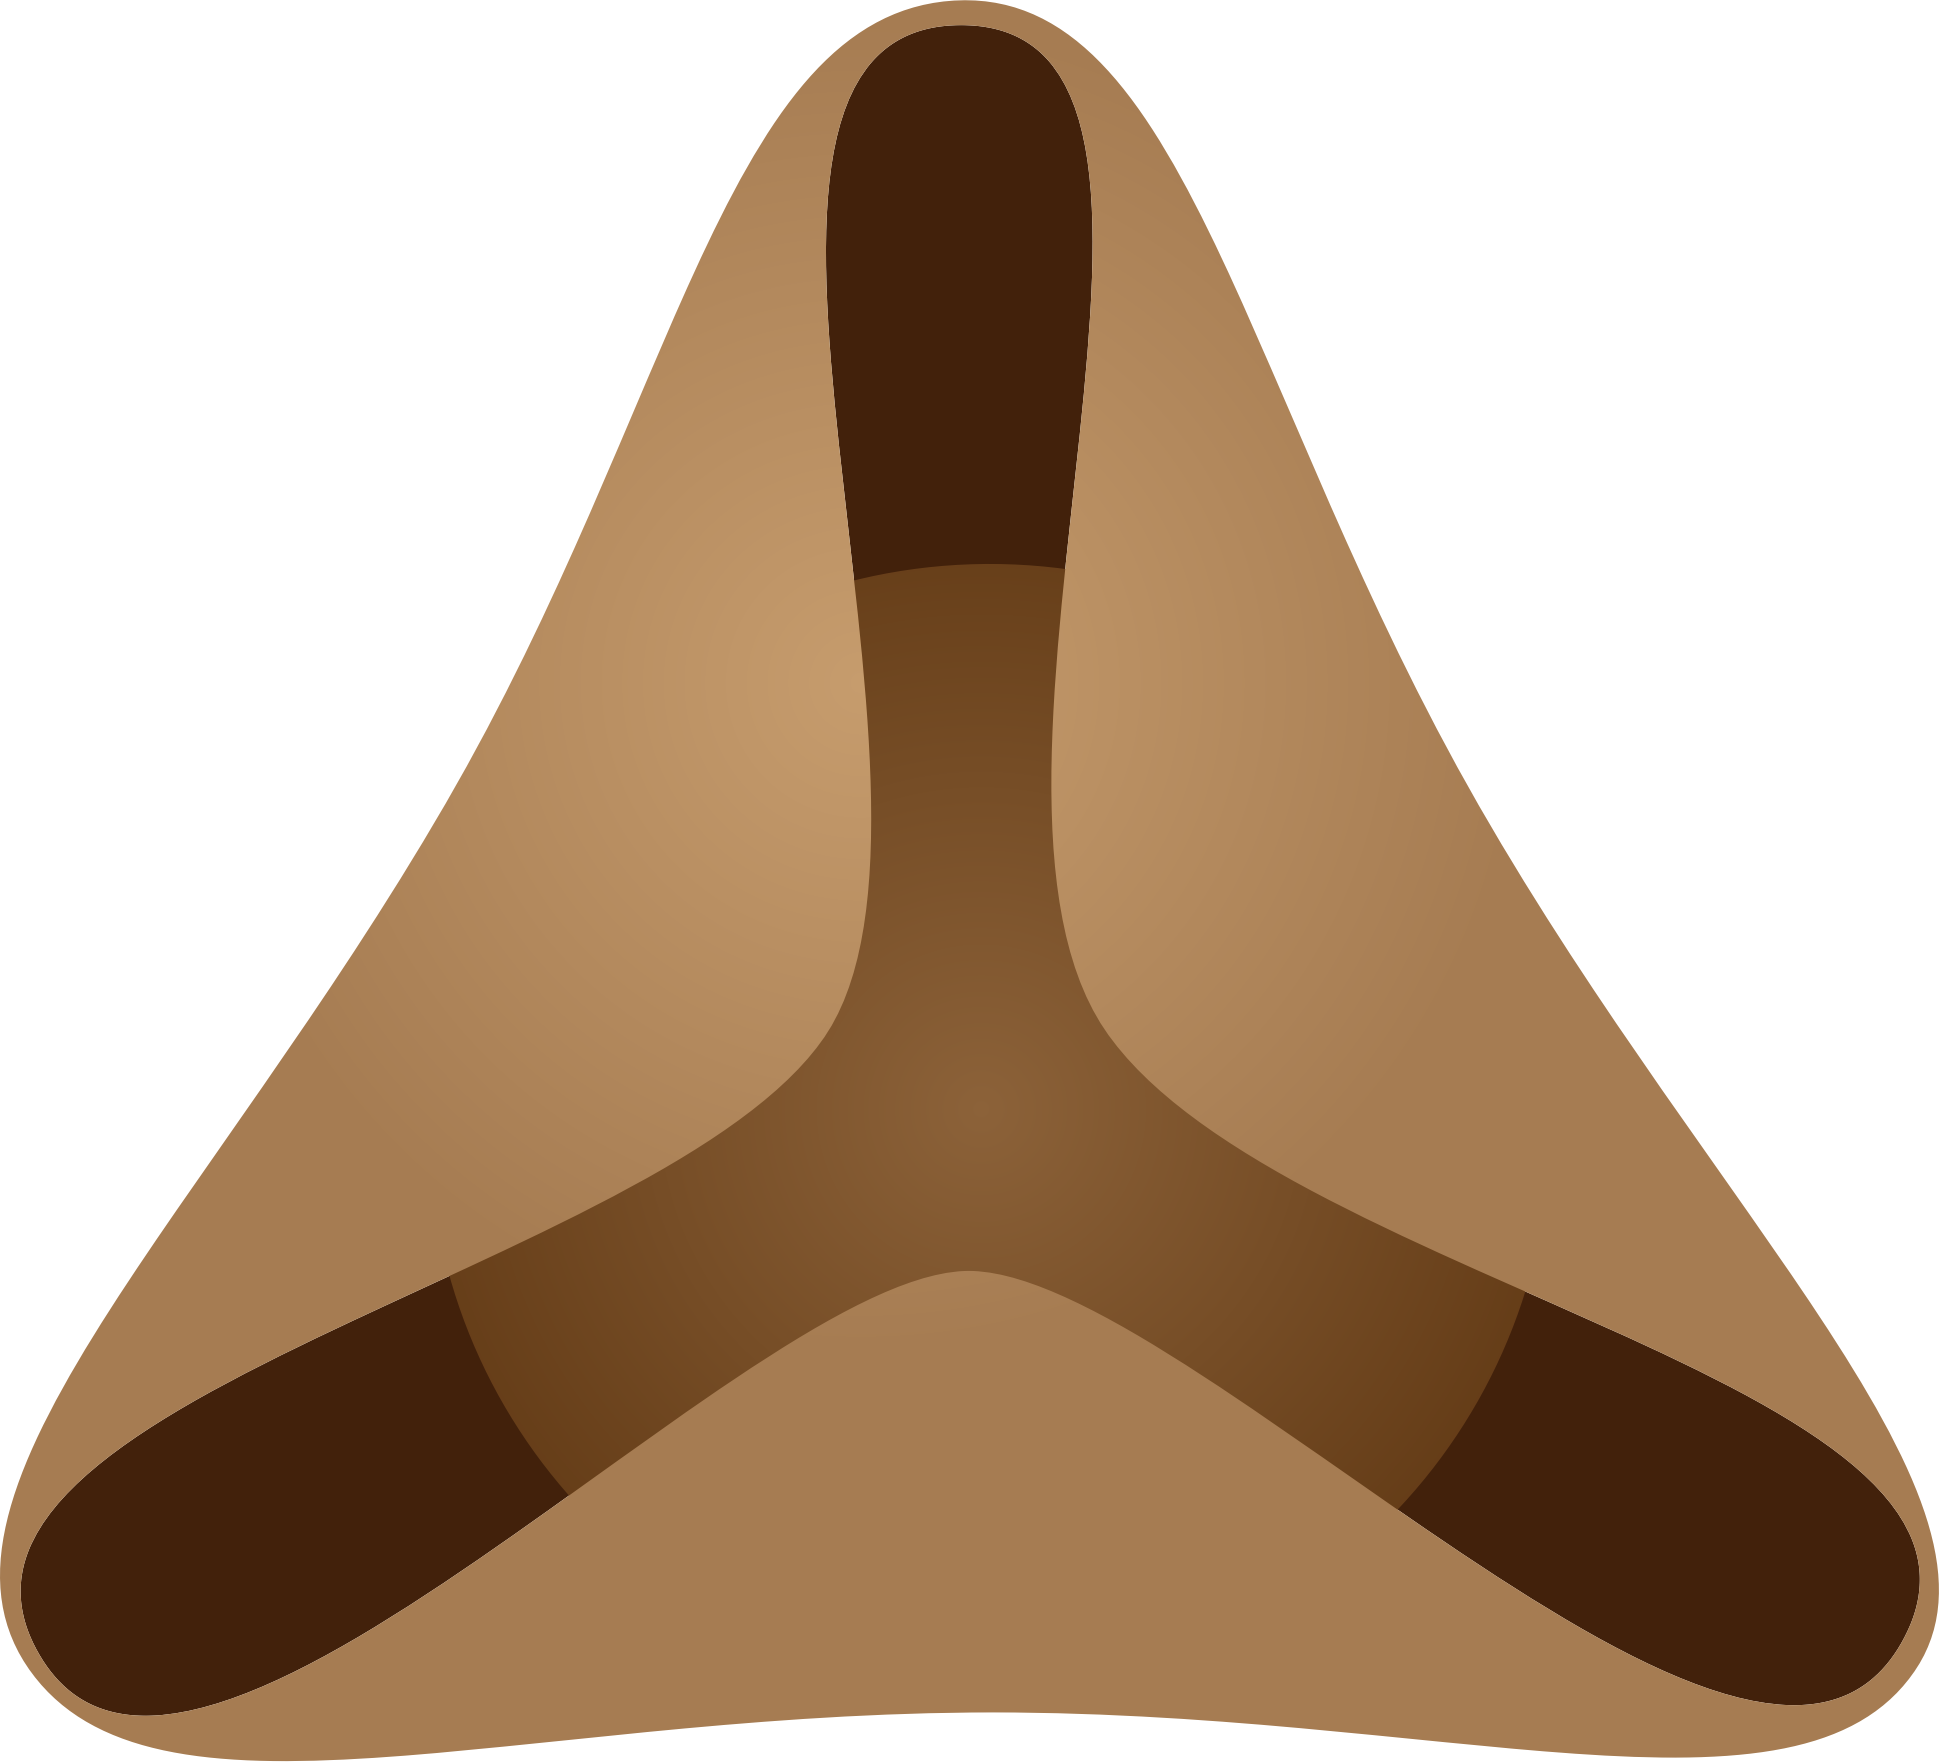 nose clipart triangle nose